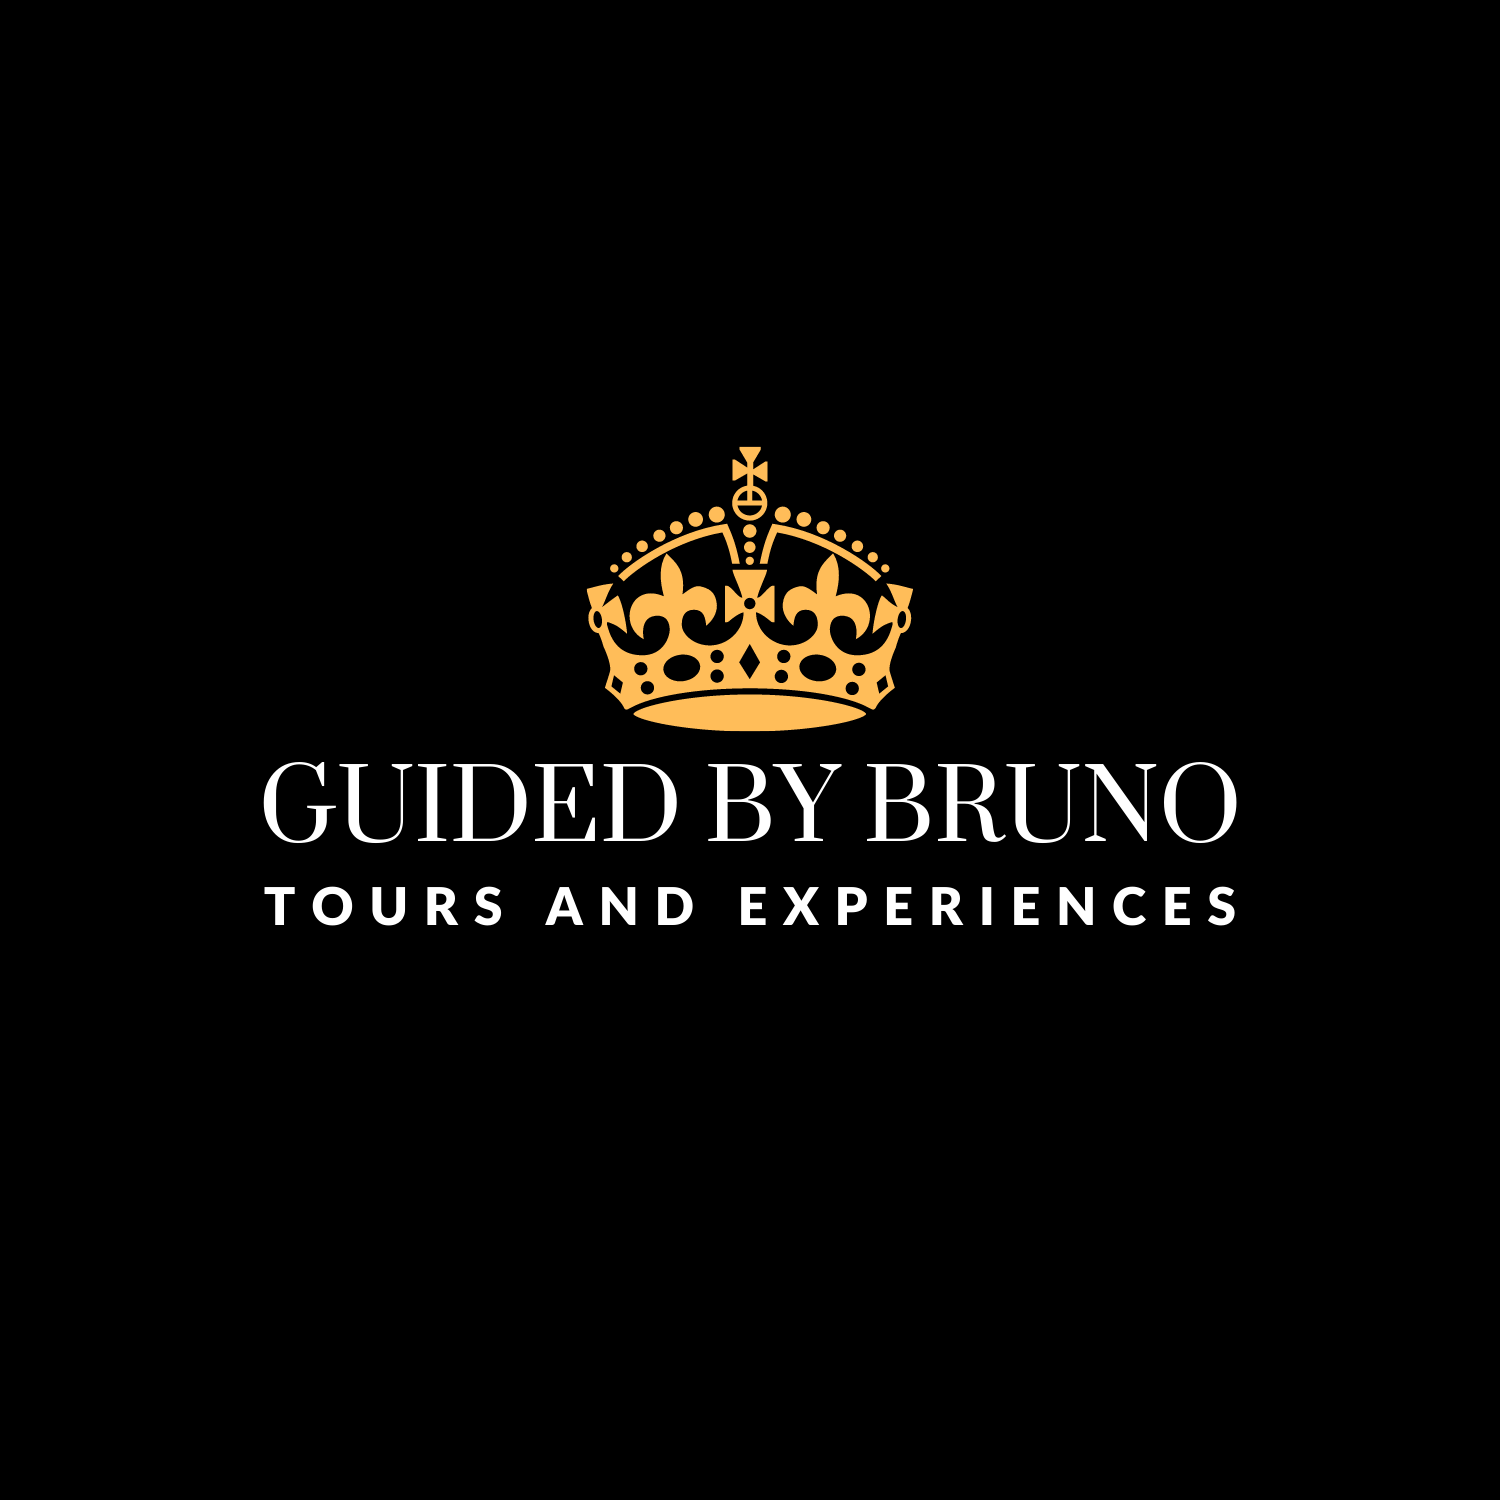 Guided by Bruno